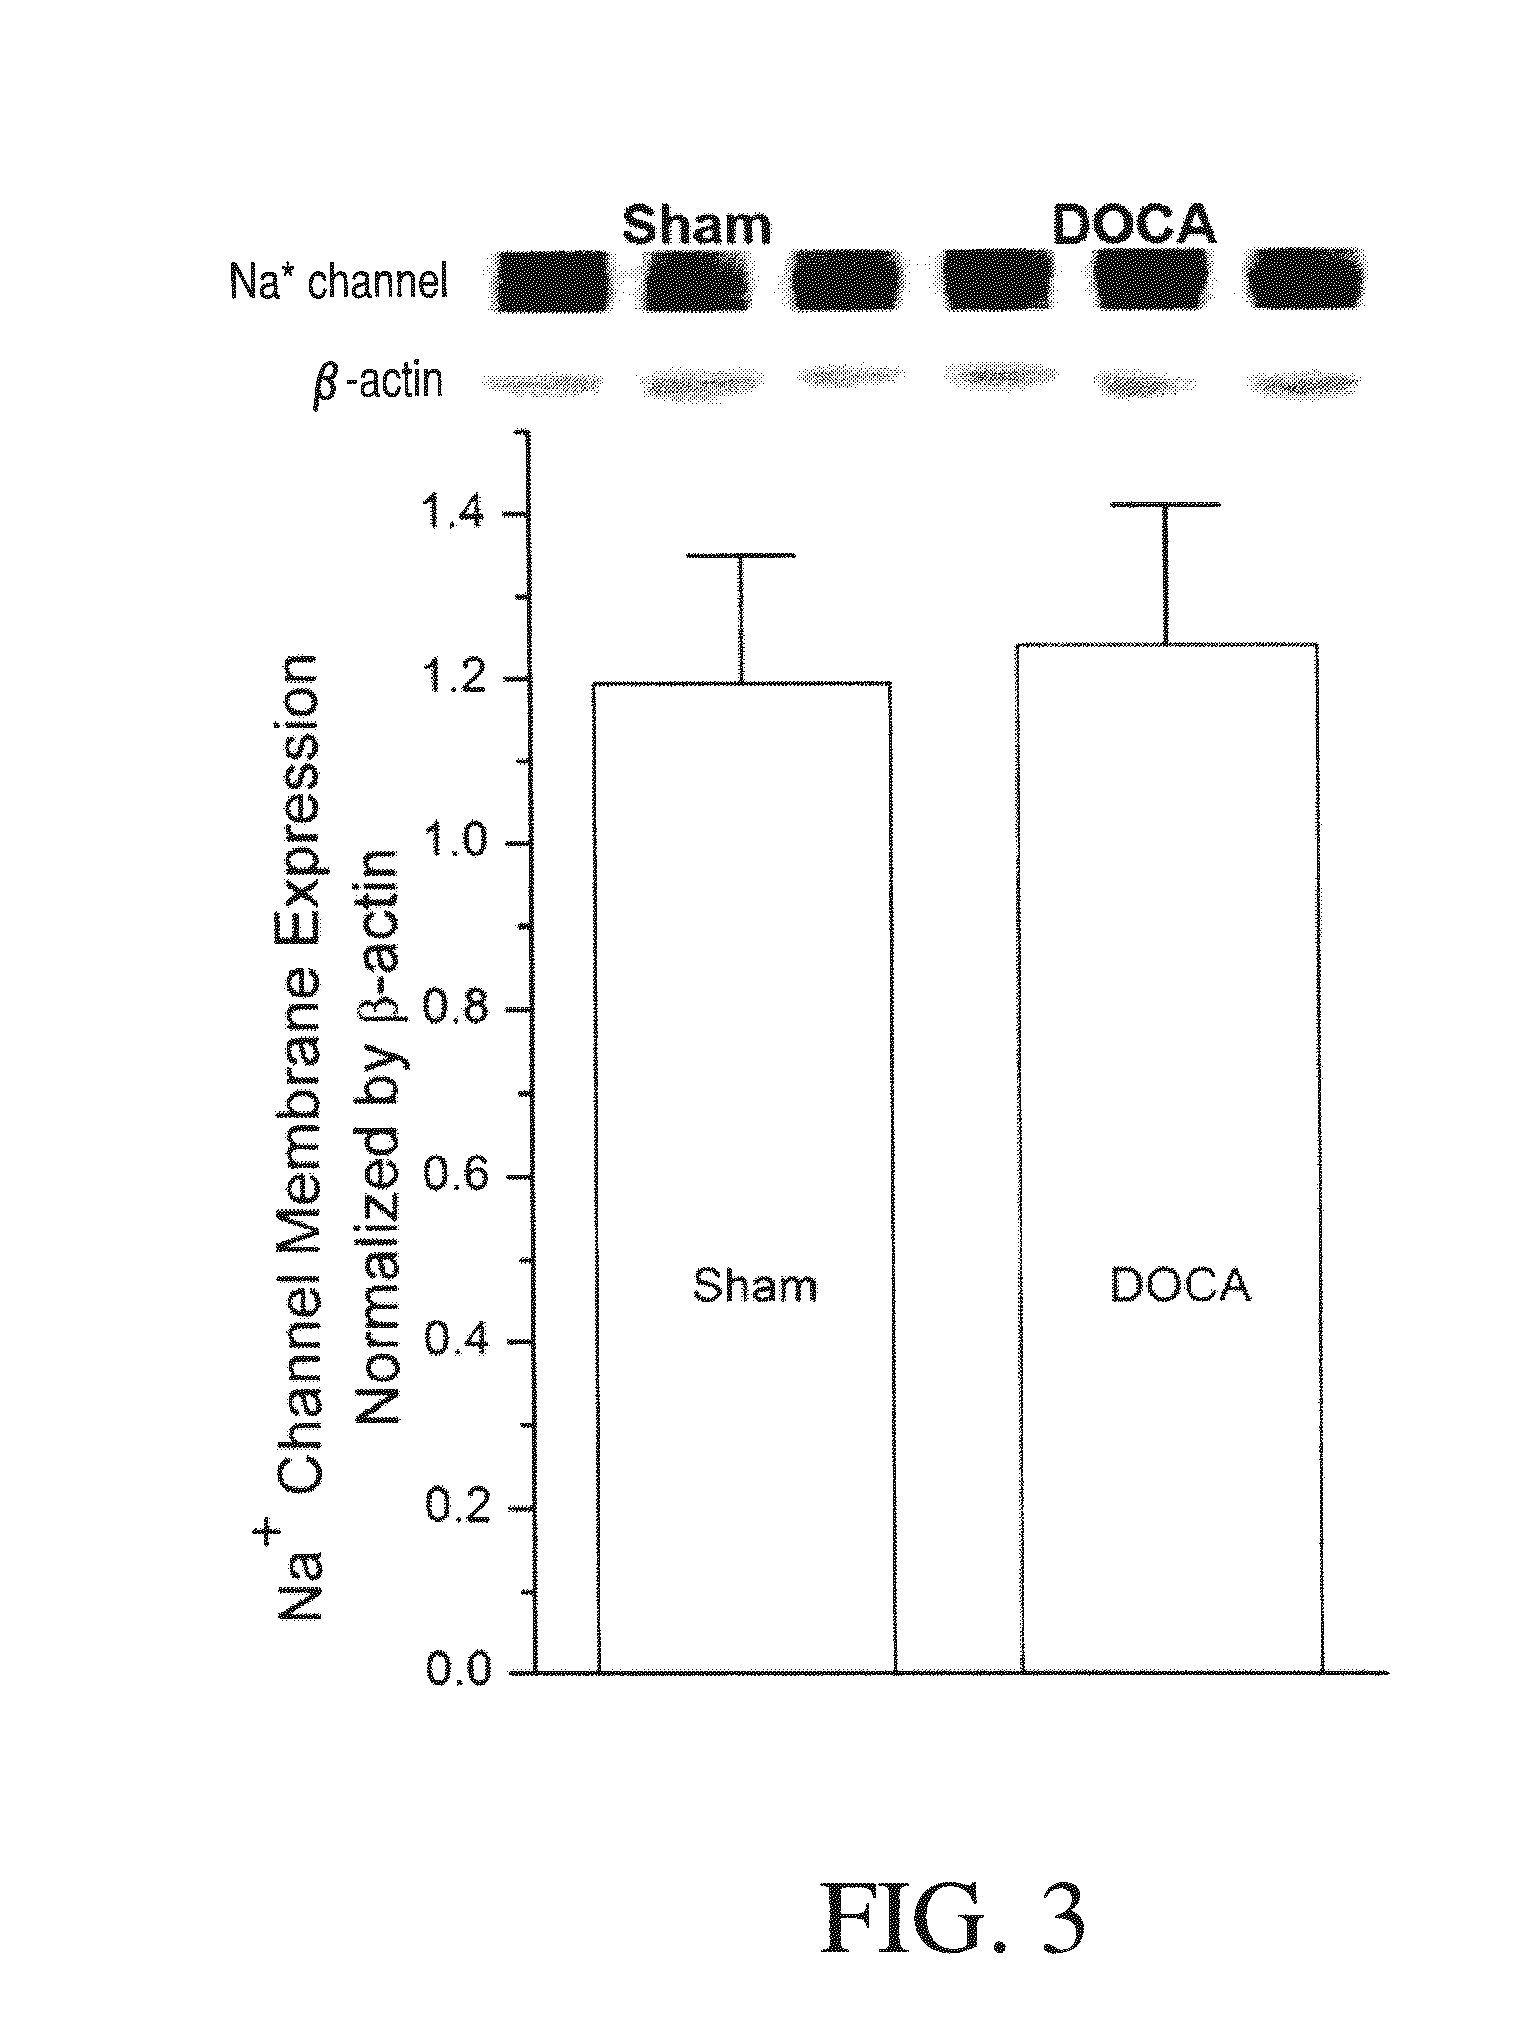 Method for Ameliorating or Preventing Arrhythmic Risk Associated with Cardiomyopathy